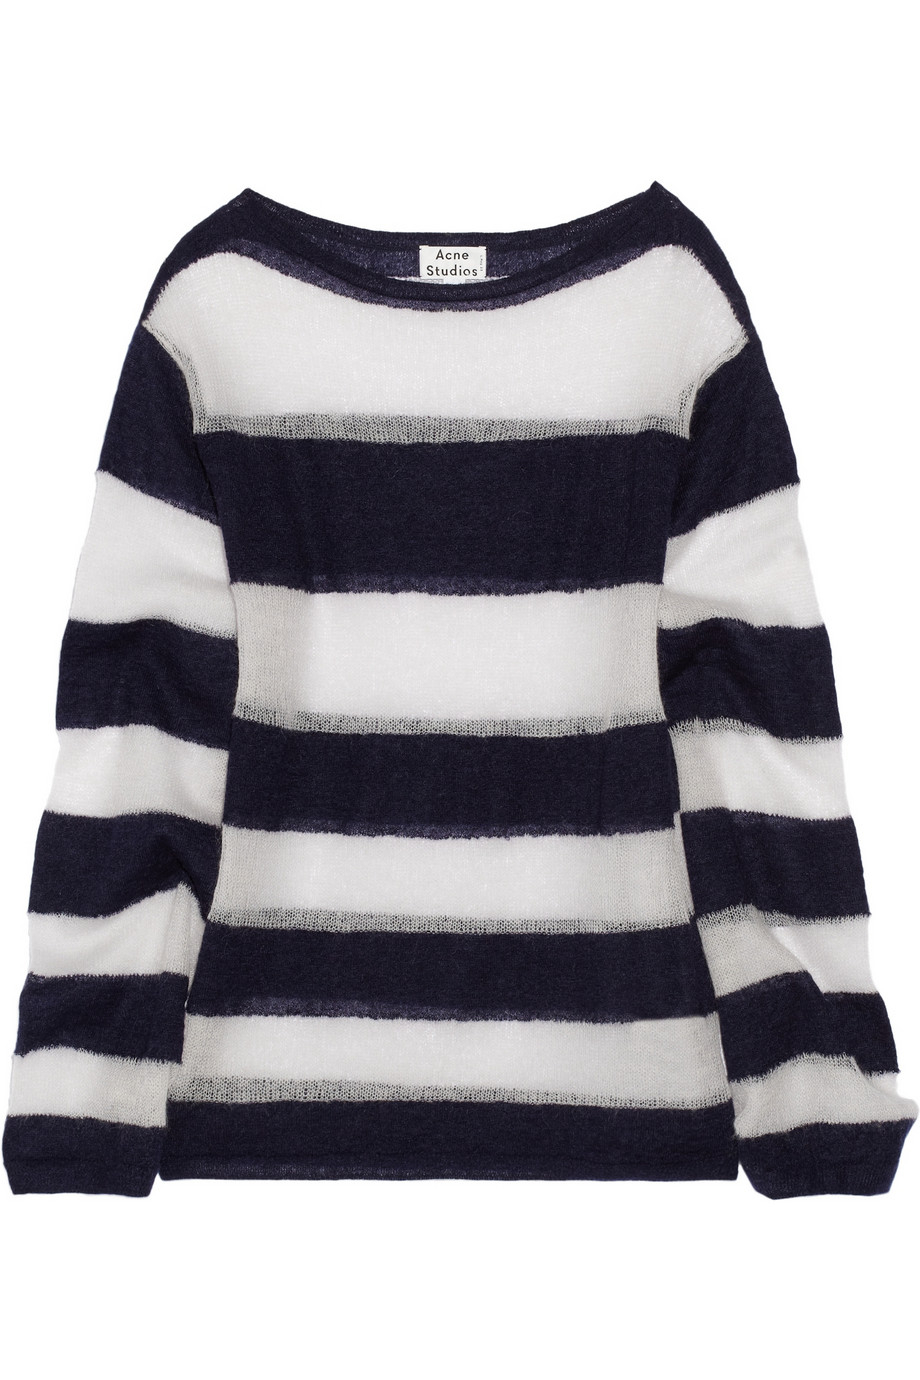 Lyst - Acne Studios Striped Openknit Mohairblend Sweater in Blue